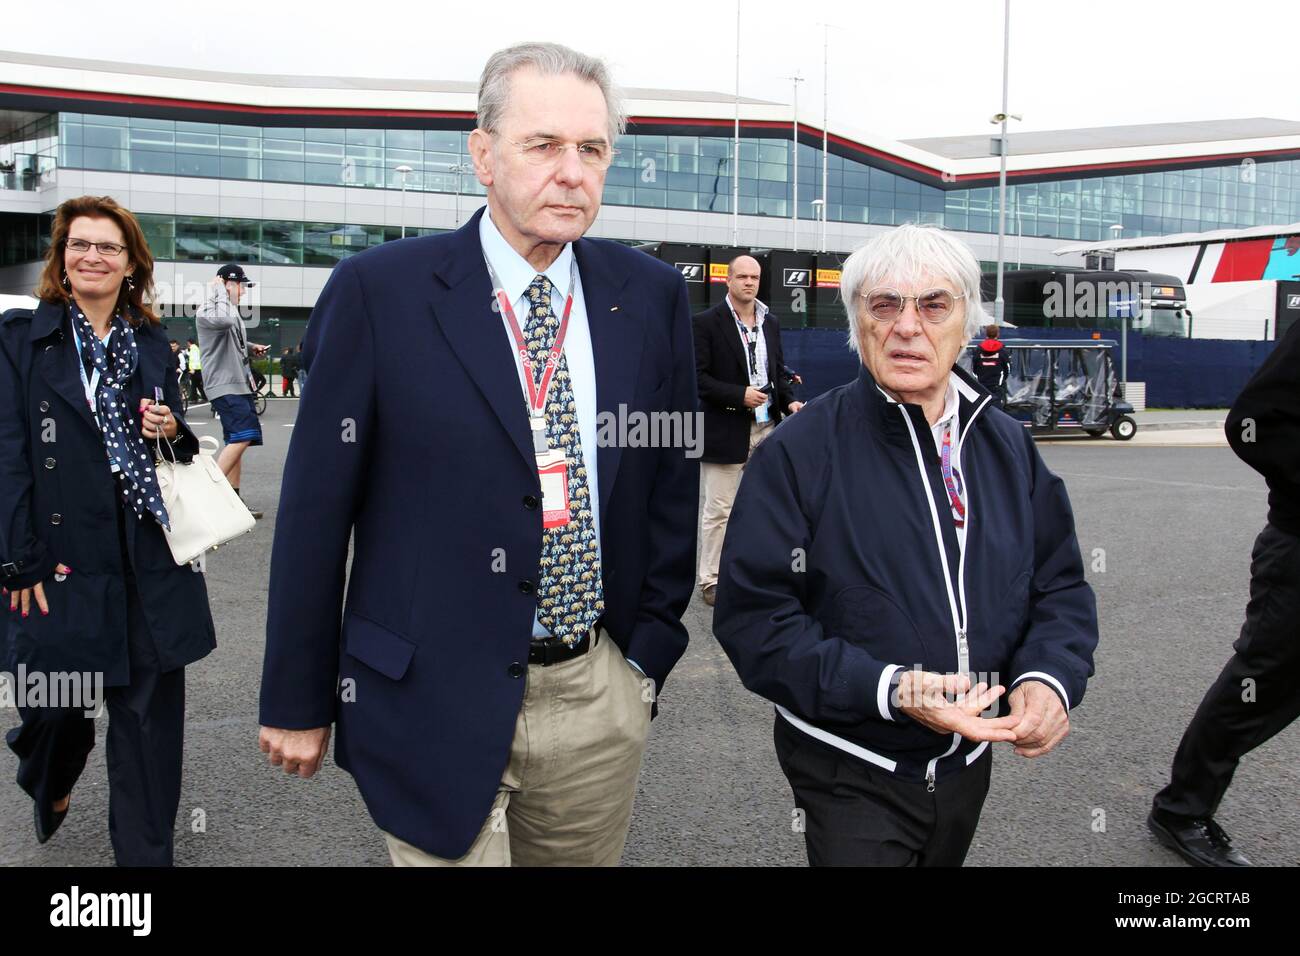 (L to R): Jacques Rogge (BEL) IOC President with Bernie Ecclestone (GBR) CEO Formula One Group (FOM). British Grand Prix, Sunday 8th July 2012. Silverstone, England. Stock Photo